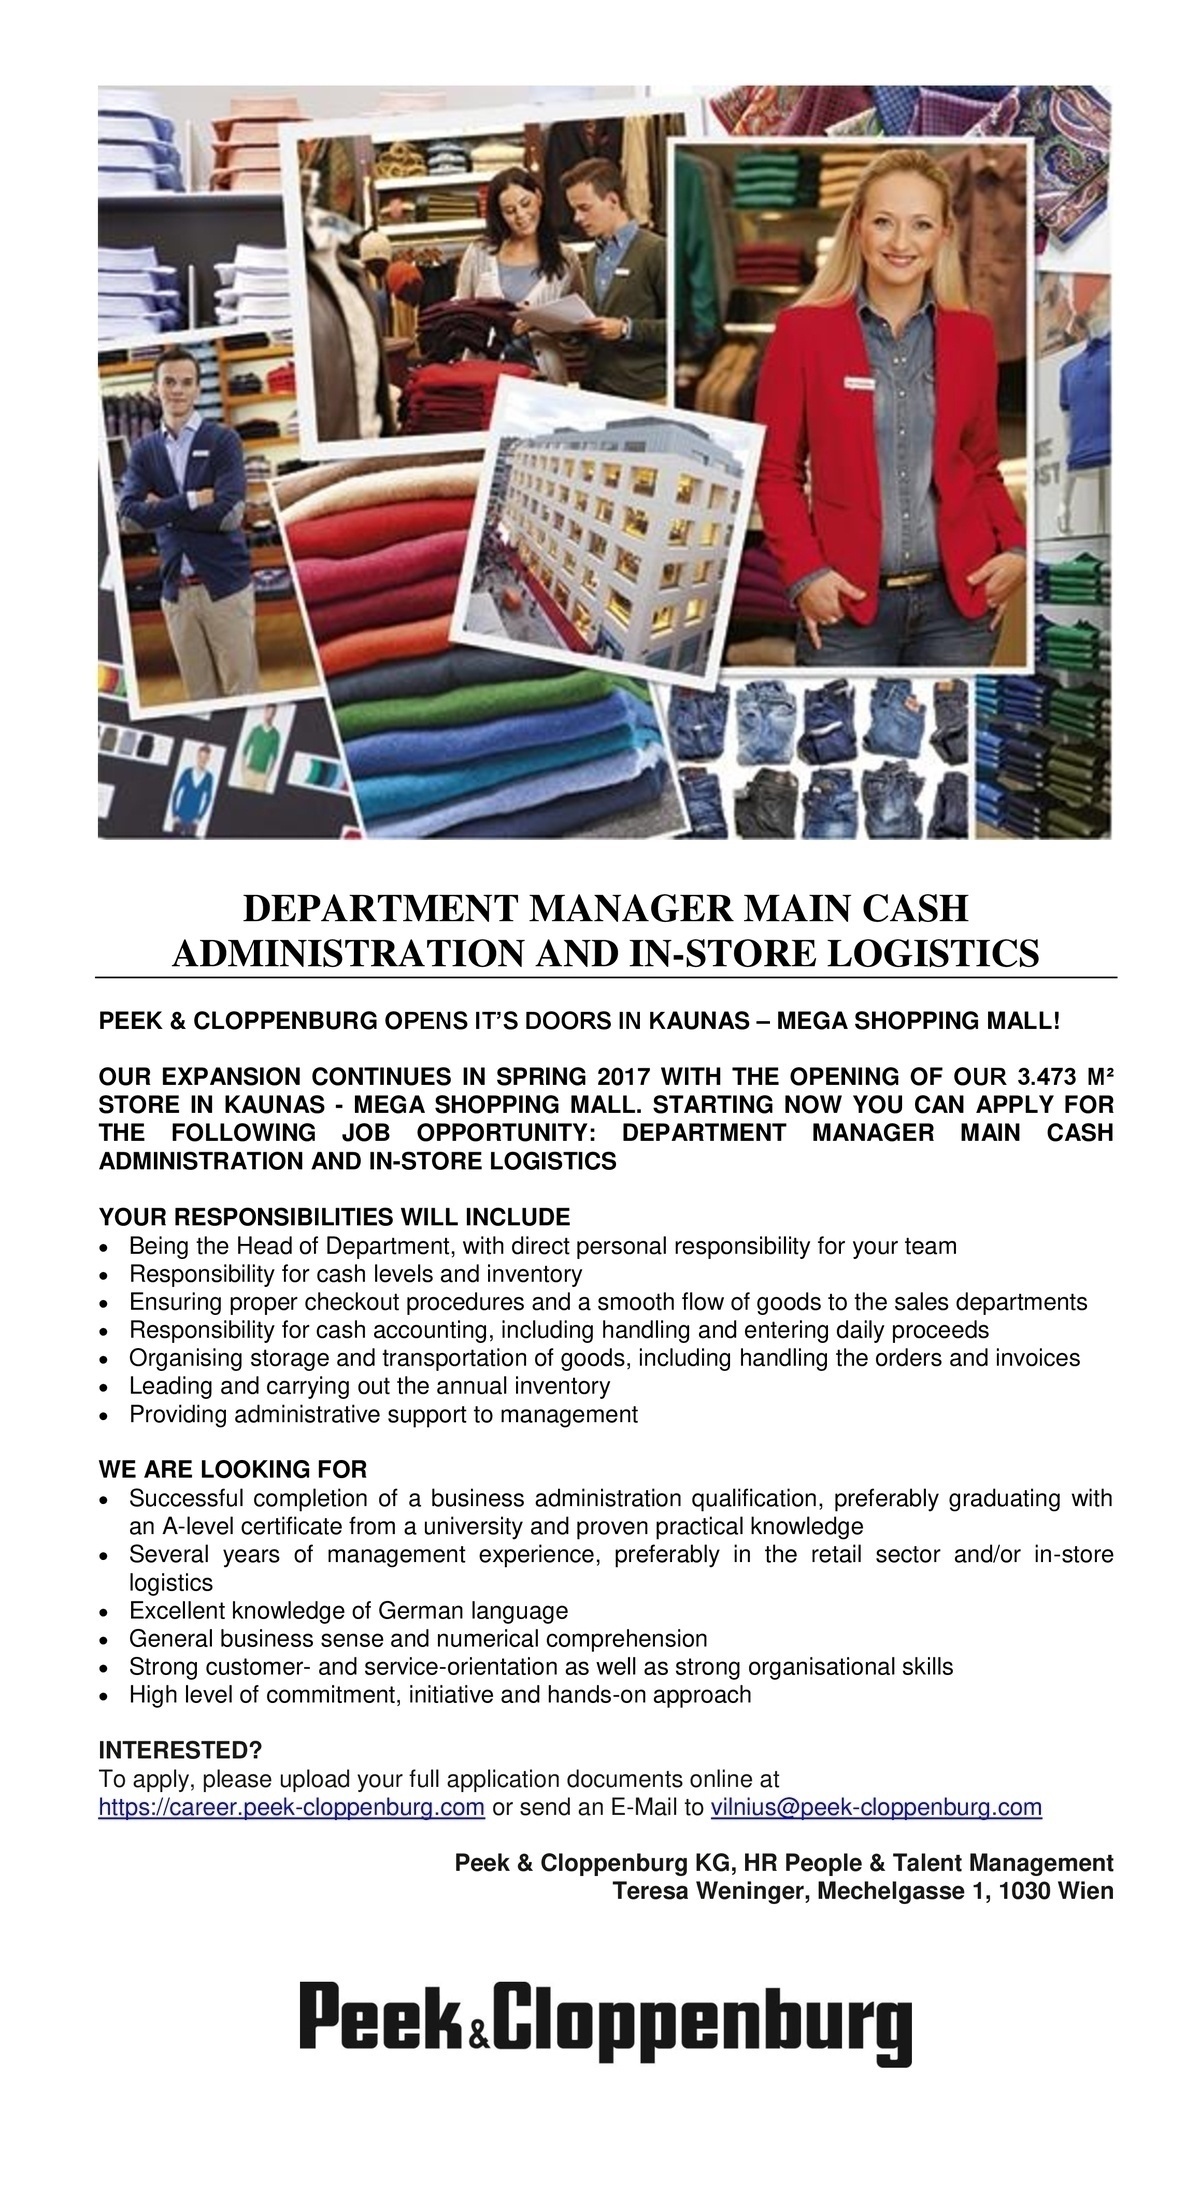 Peek&Cloppenburg DEPARTMENT MANAGER MAIN CASH ADMINISTRATION AND IN-STORE LOGISTICS